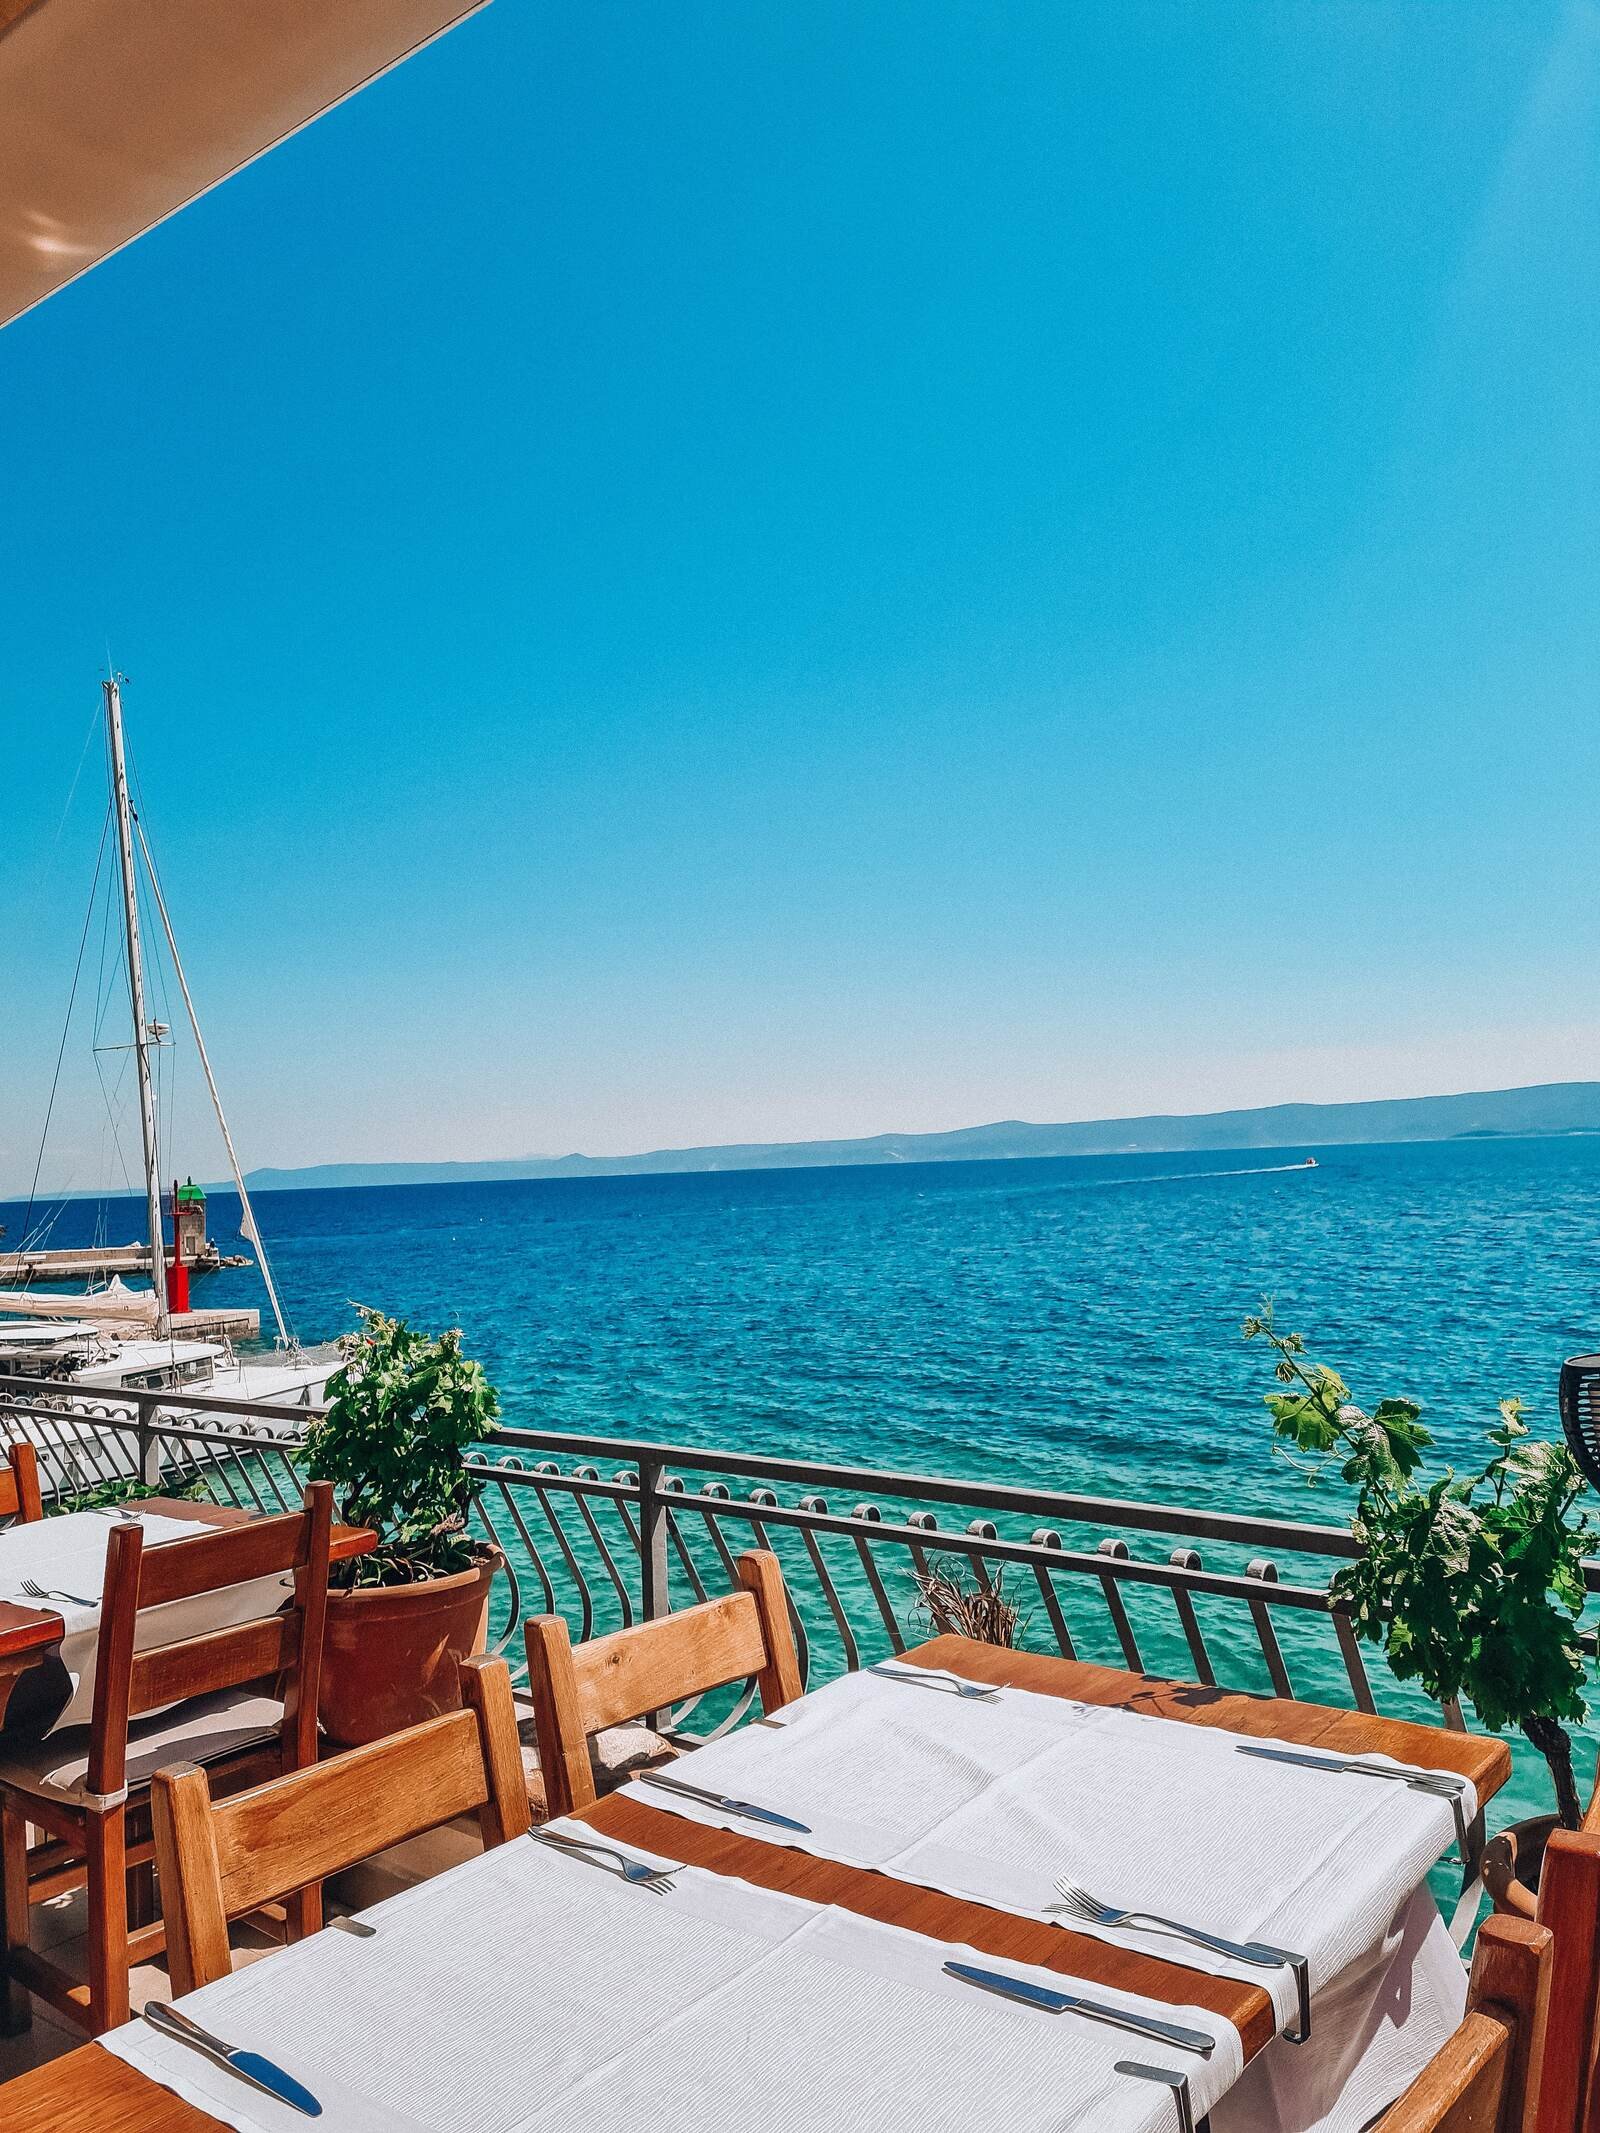 A wooden table on a sun terrace laid ready for people to eat. The table is right next to the terrace balcony and looks  out across blue water with a catamaran in it